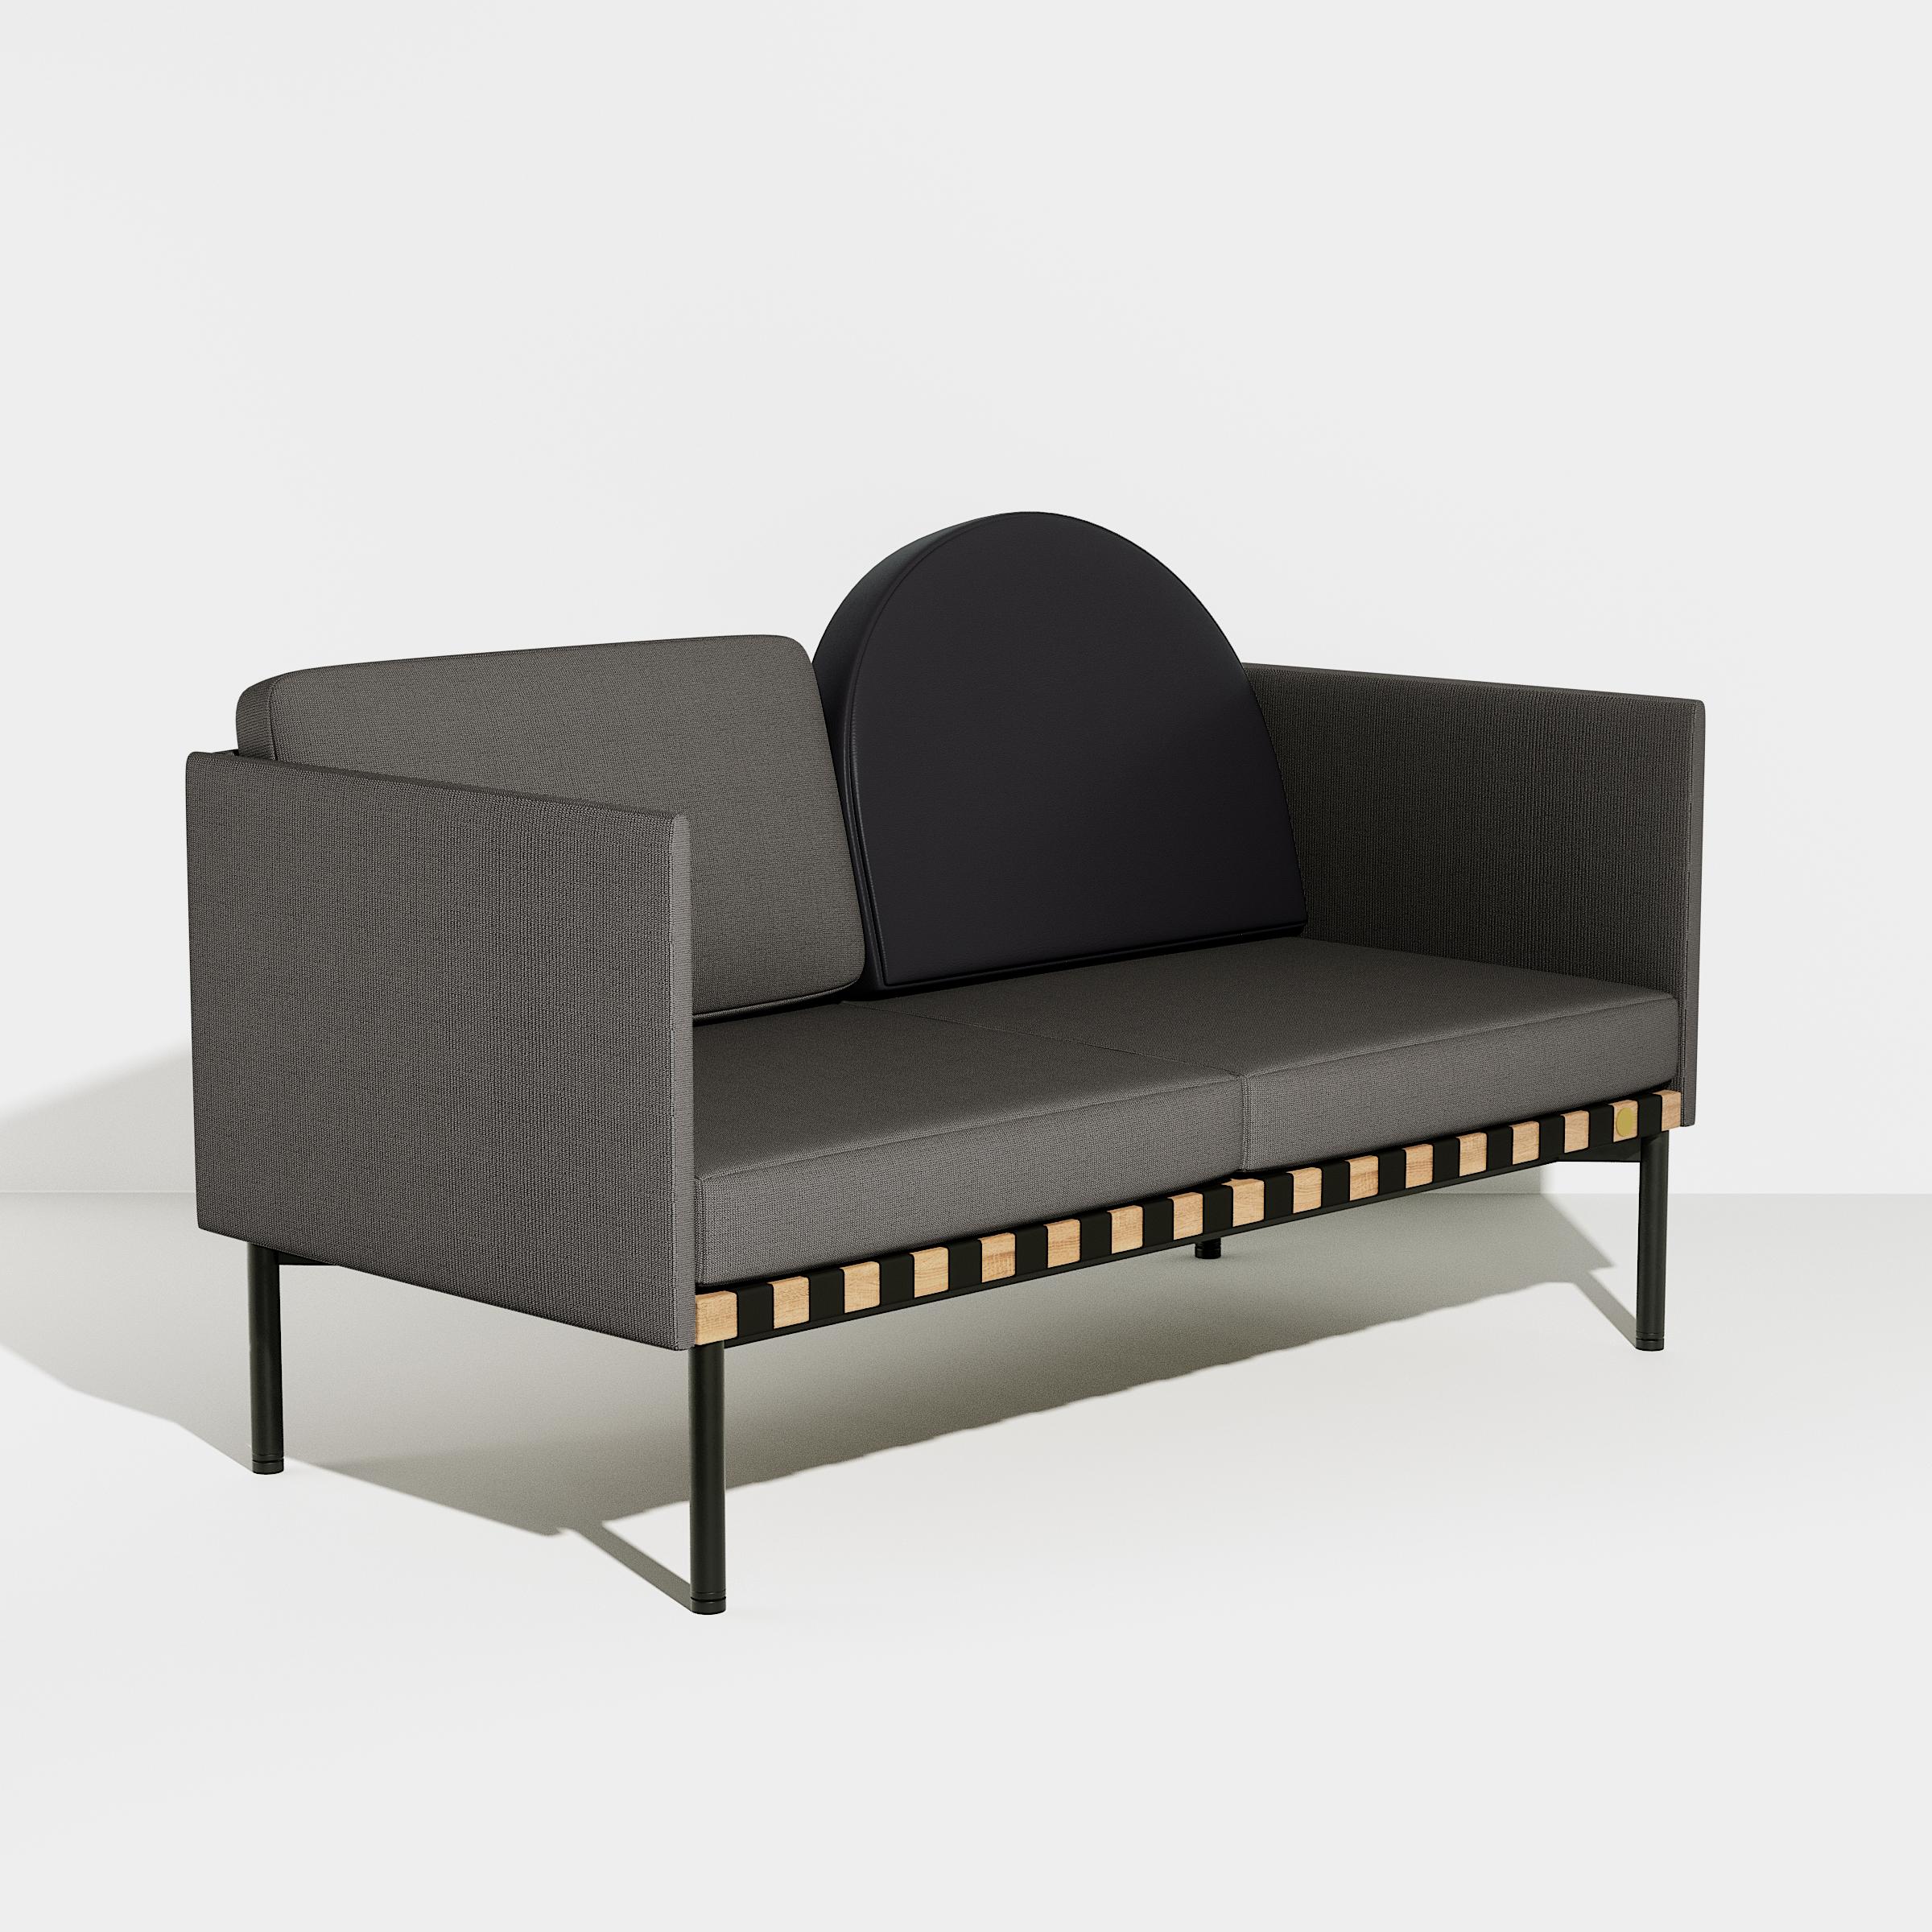 Petite Friture Grid 2 Seater Sofa with Armrest in Grey-black by Studio Pool, 2015

Pool designed the Grid collection in reference to the Bauhaus style and in honour of the graphic talents. Each element of this all-modular system retains the